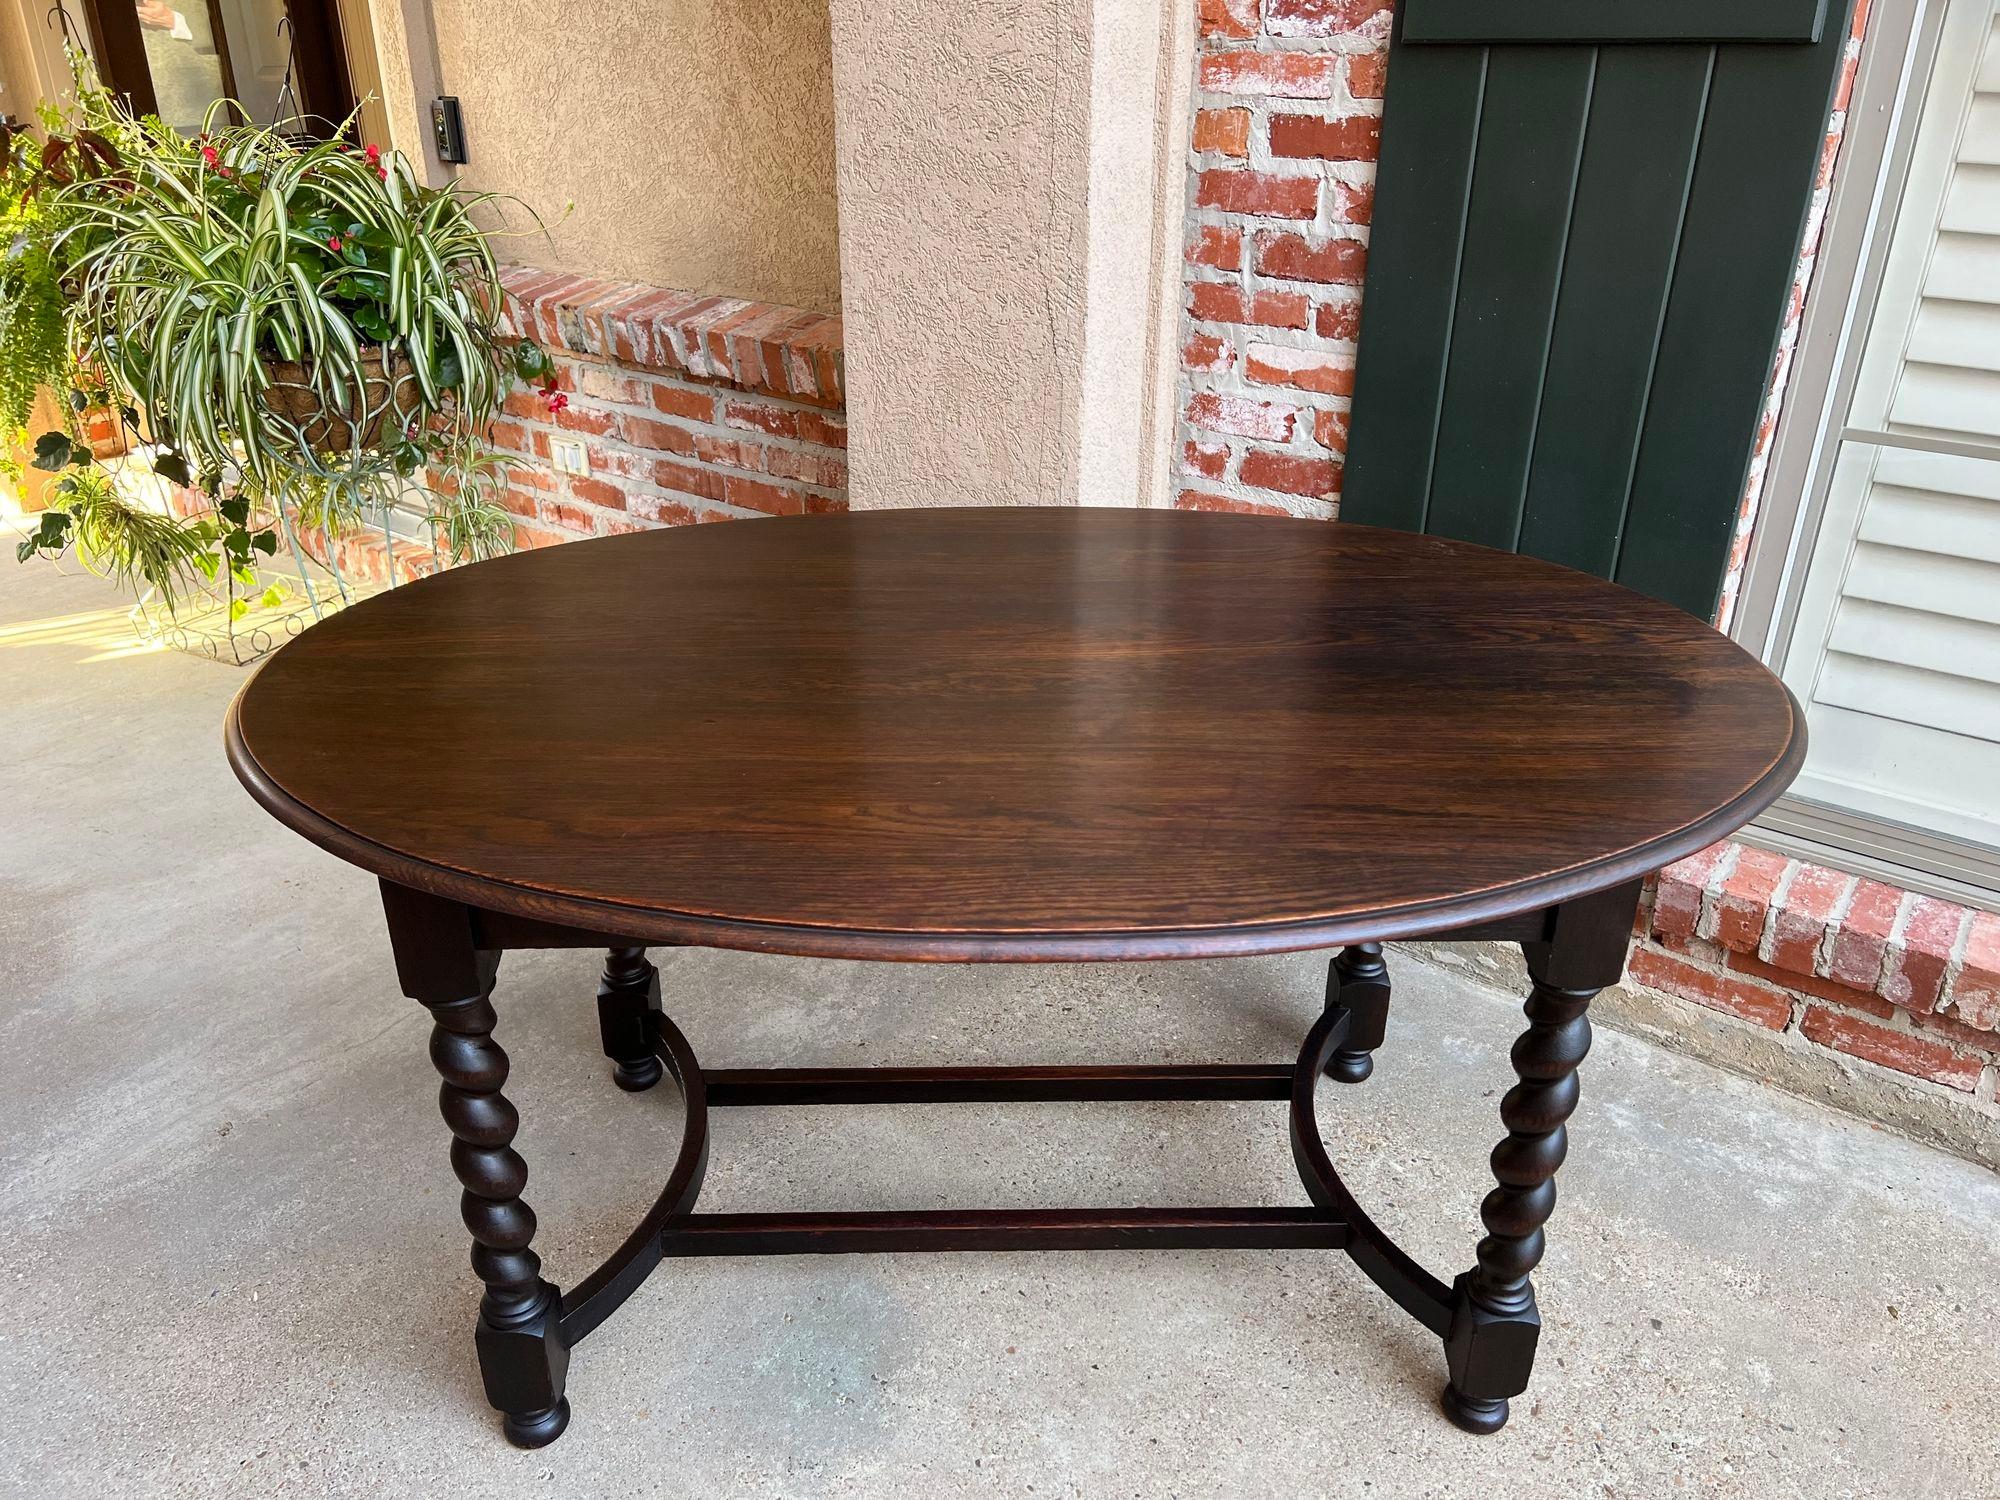 Antique English oval dining Foyer table Barley Twist Jacobean dark oak c1920.

Direct from English, we were so excited to find this amazing OVAL table in a fabulous 5 ft. length!!
The large oval table top has a beveled edge with a wide apron